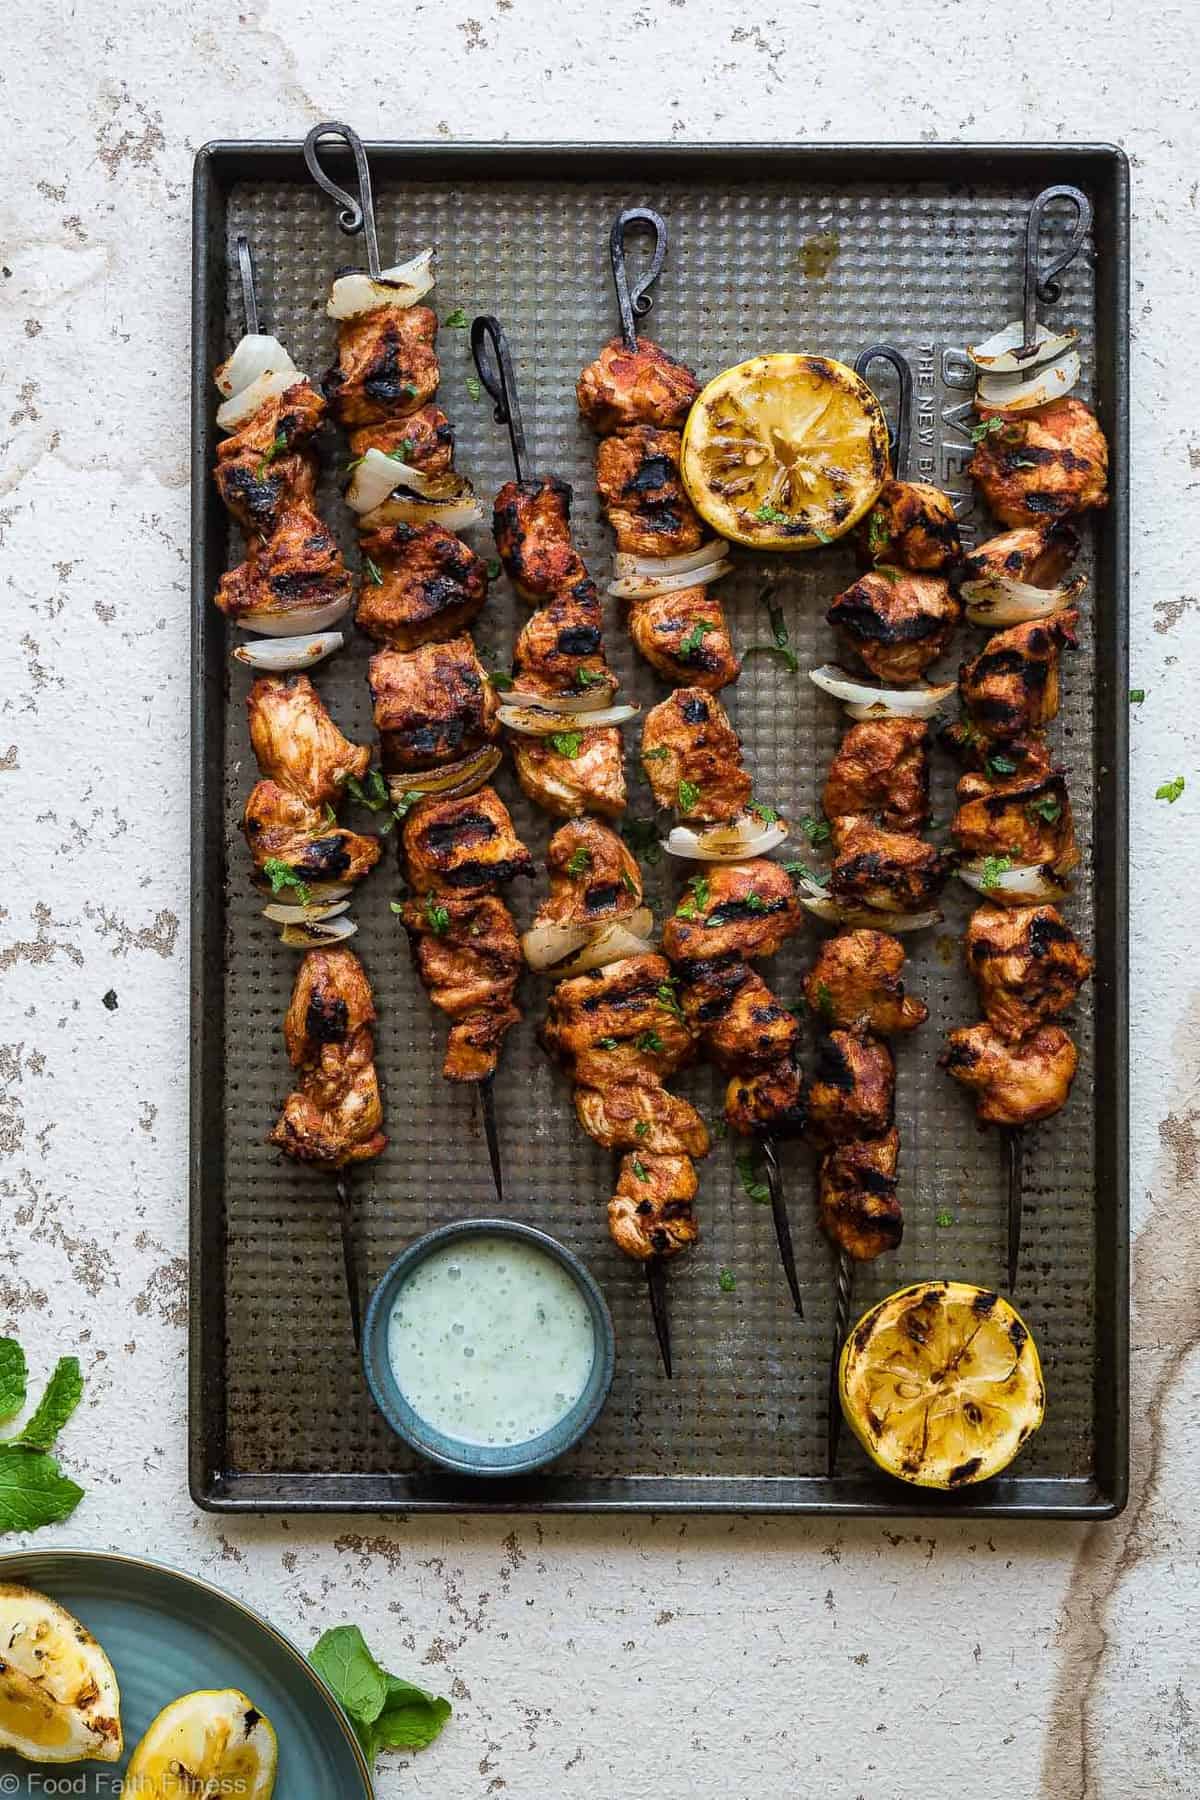 Tomato Grilled Moroccan Chicken Kebabs - These quick and easy, low carb Grilled Moroccan Chicken skewers are complete with a healthy, high protein yogurt mint sauce! Gluten free, only 1 Weight Watchers Freestlye point and SO delicious! | #Foodfaithfitness | #Lowcarb #WeightWatchers #Glutenfree #Healthy #Grilling